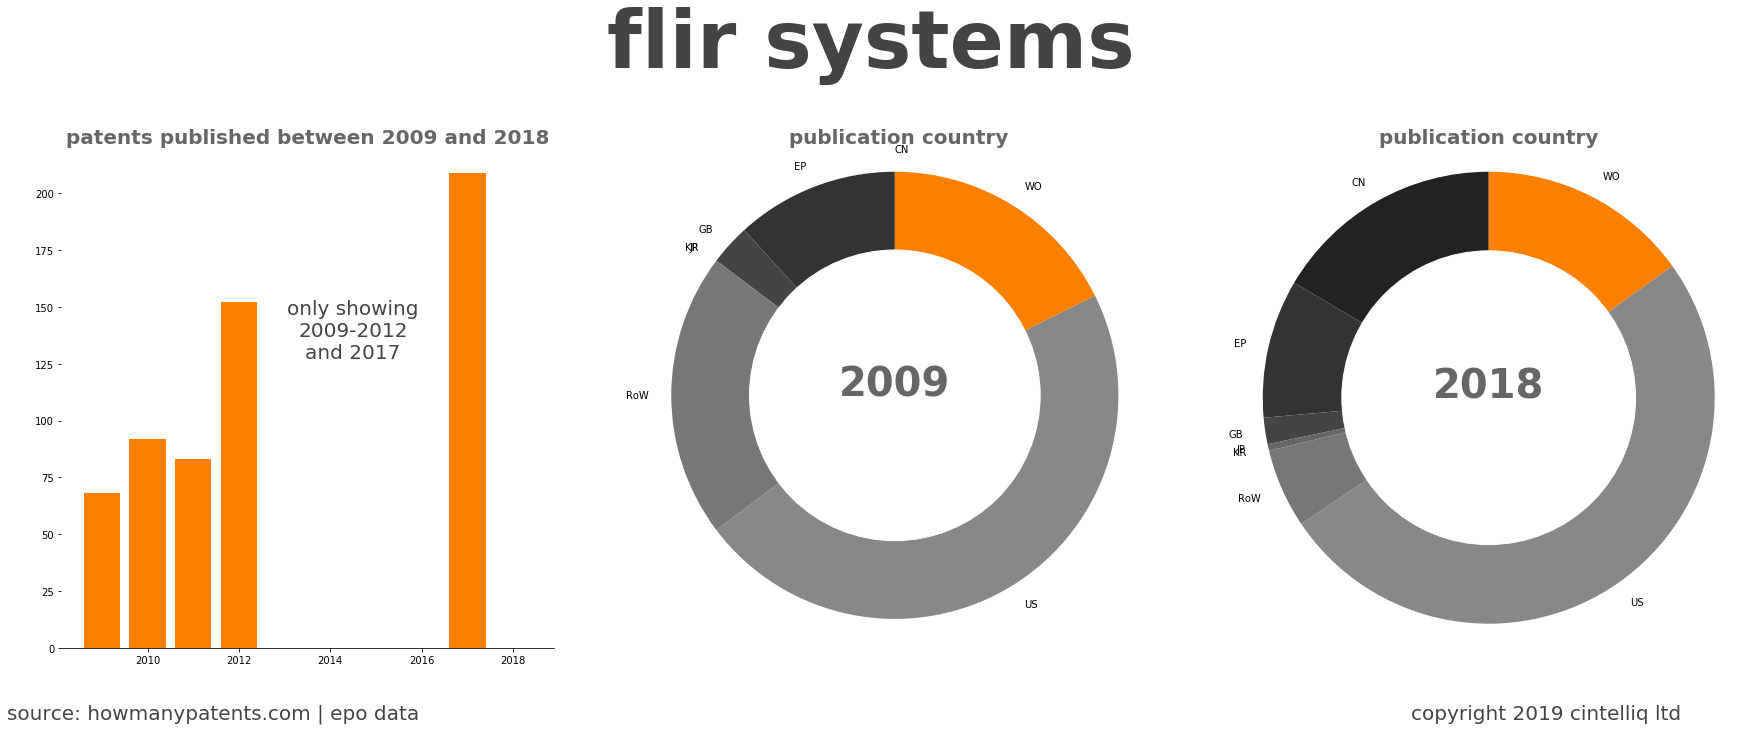 summary of patents for Flir Systems